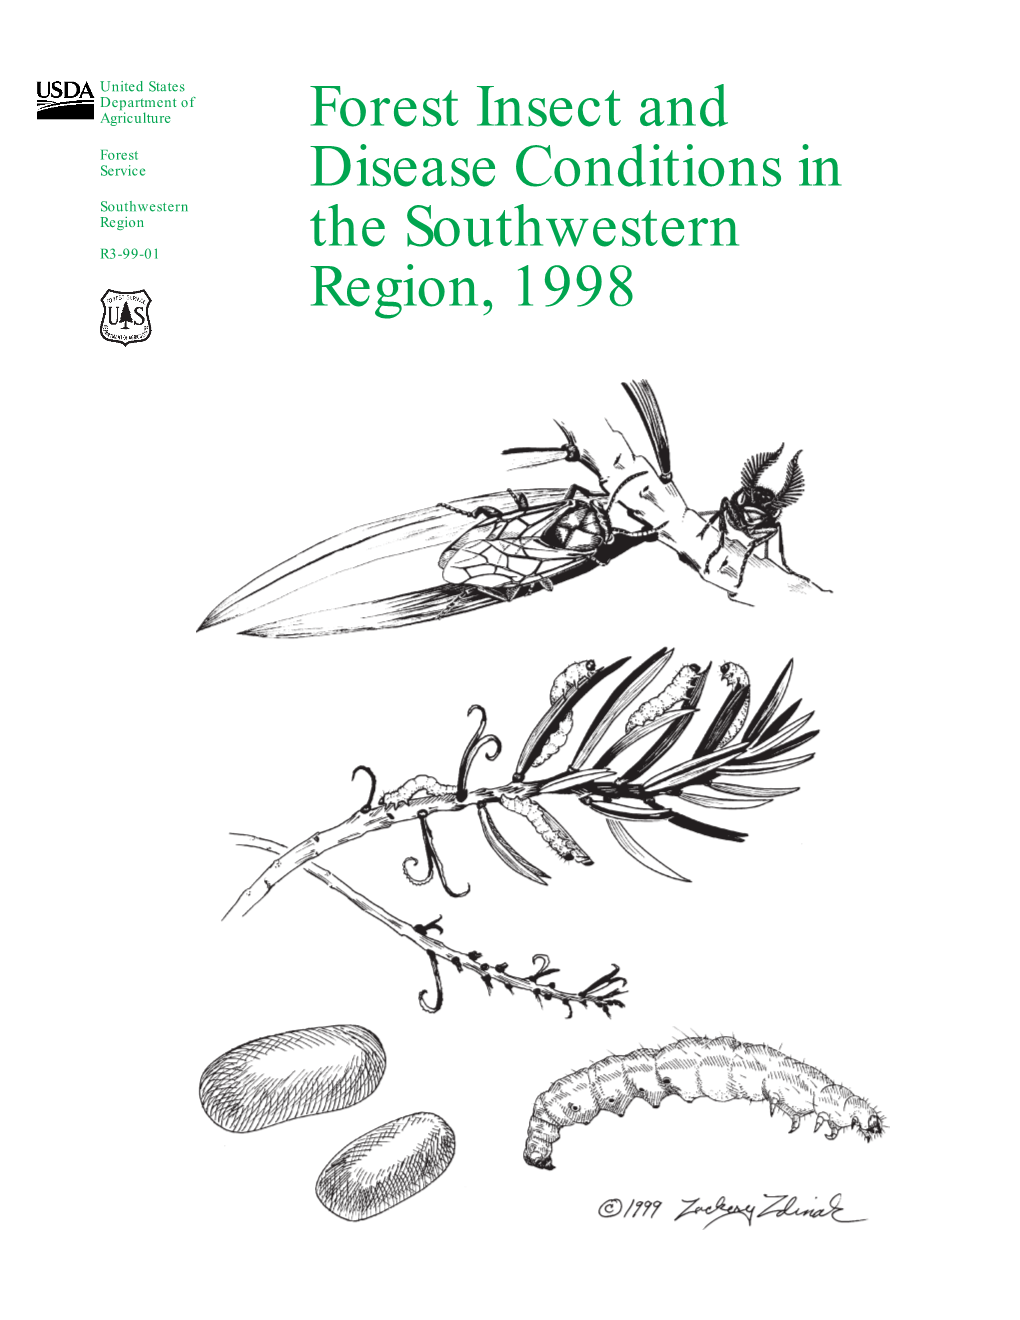 Forest Insect and Disease Conditions in the Southwestern Region, 1998